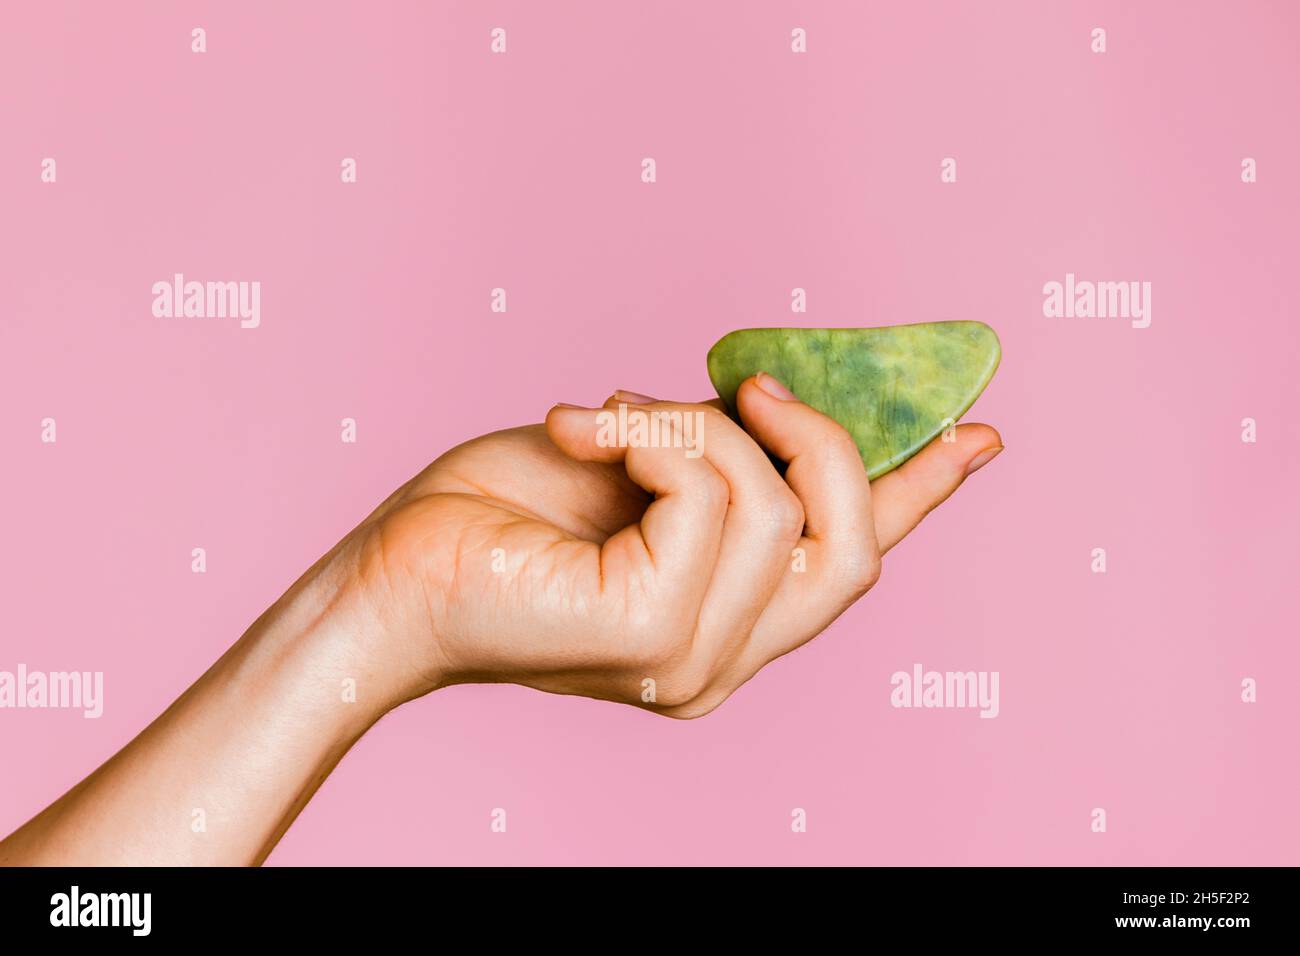 Green jade massager Guasha face scraper in a female hand on a pink background.  Stock Photo